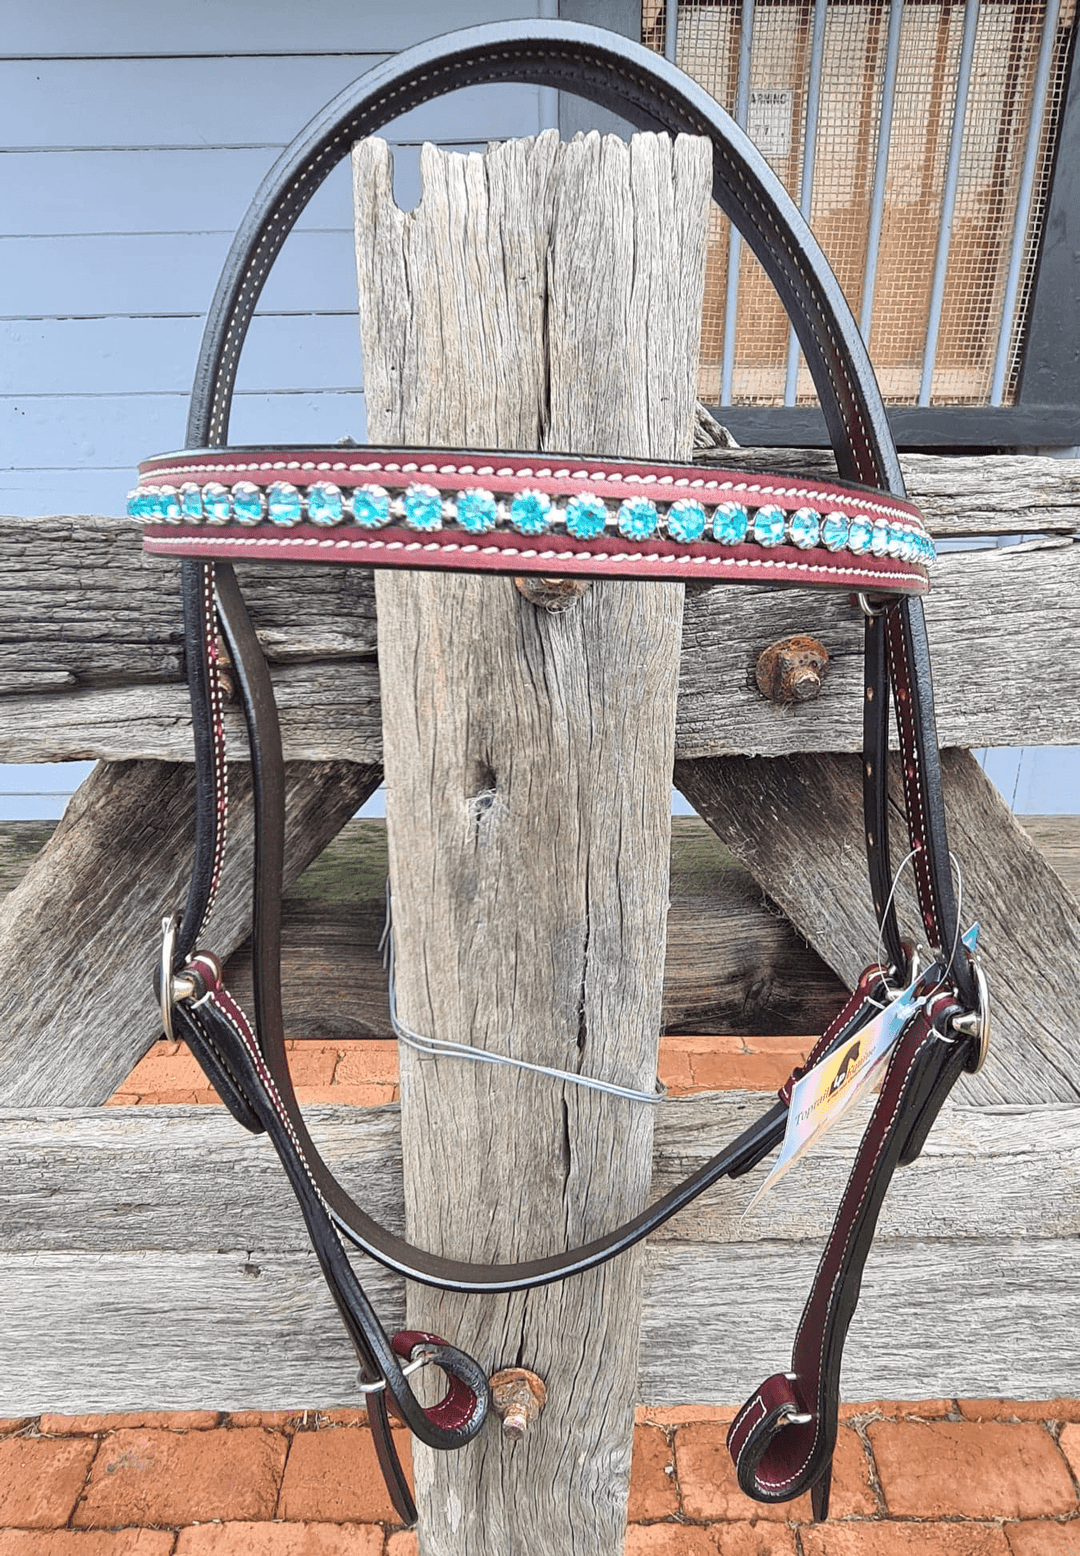 Top Rail Equine Bridles Cob-Full / Havana Brown Top Rail Leather Bridle with Turquoise Beading